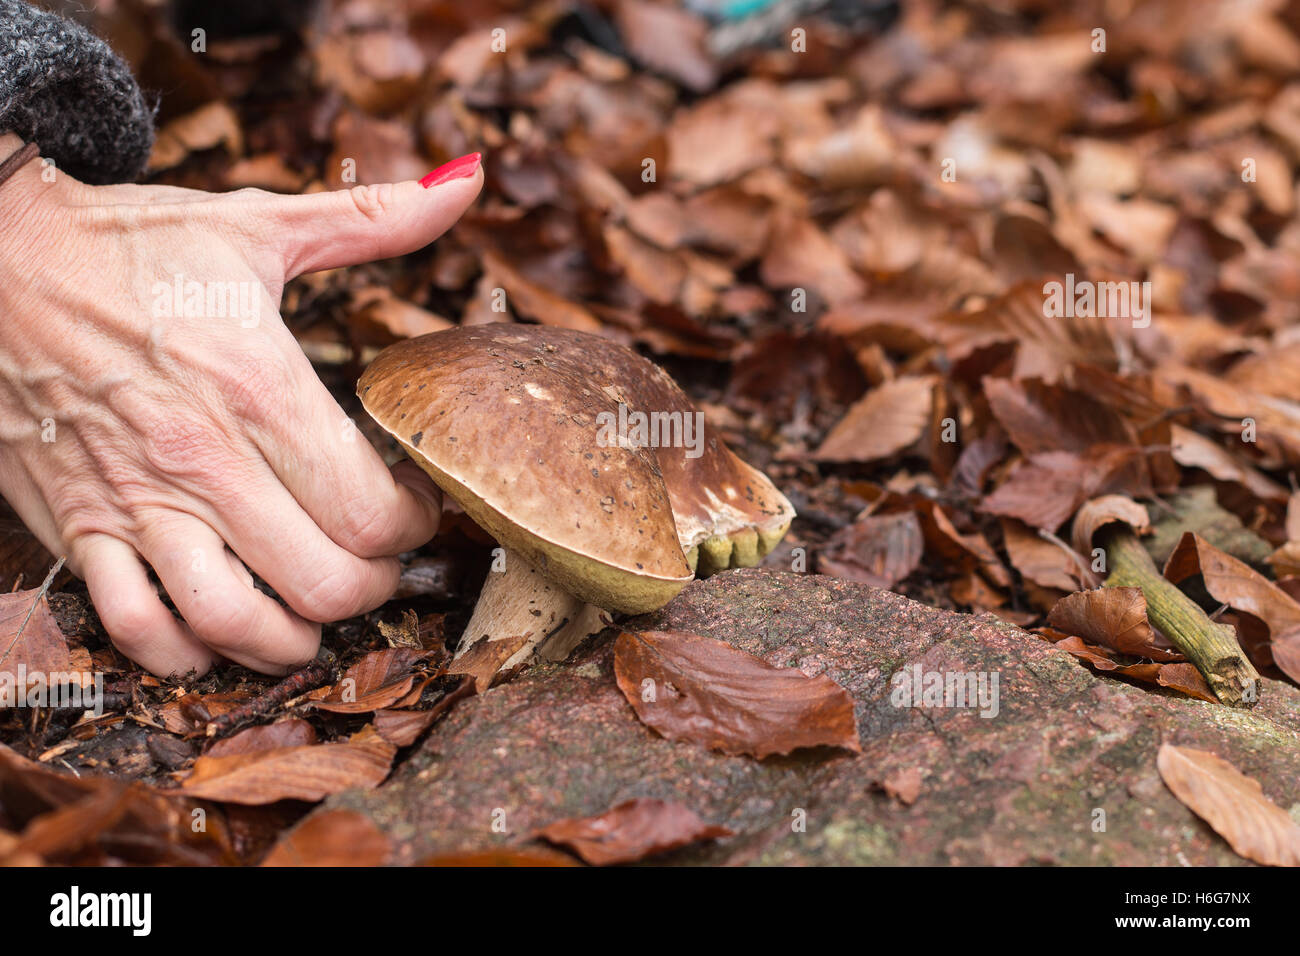 A woman's hand mushroom picking a funghi porcini in autumn fall season porino fungo fallen leaves in the background Stock Photo